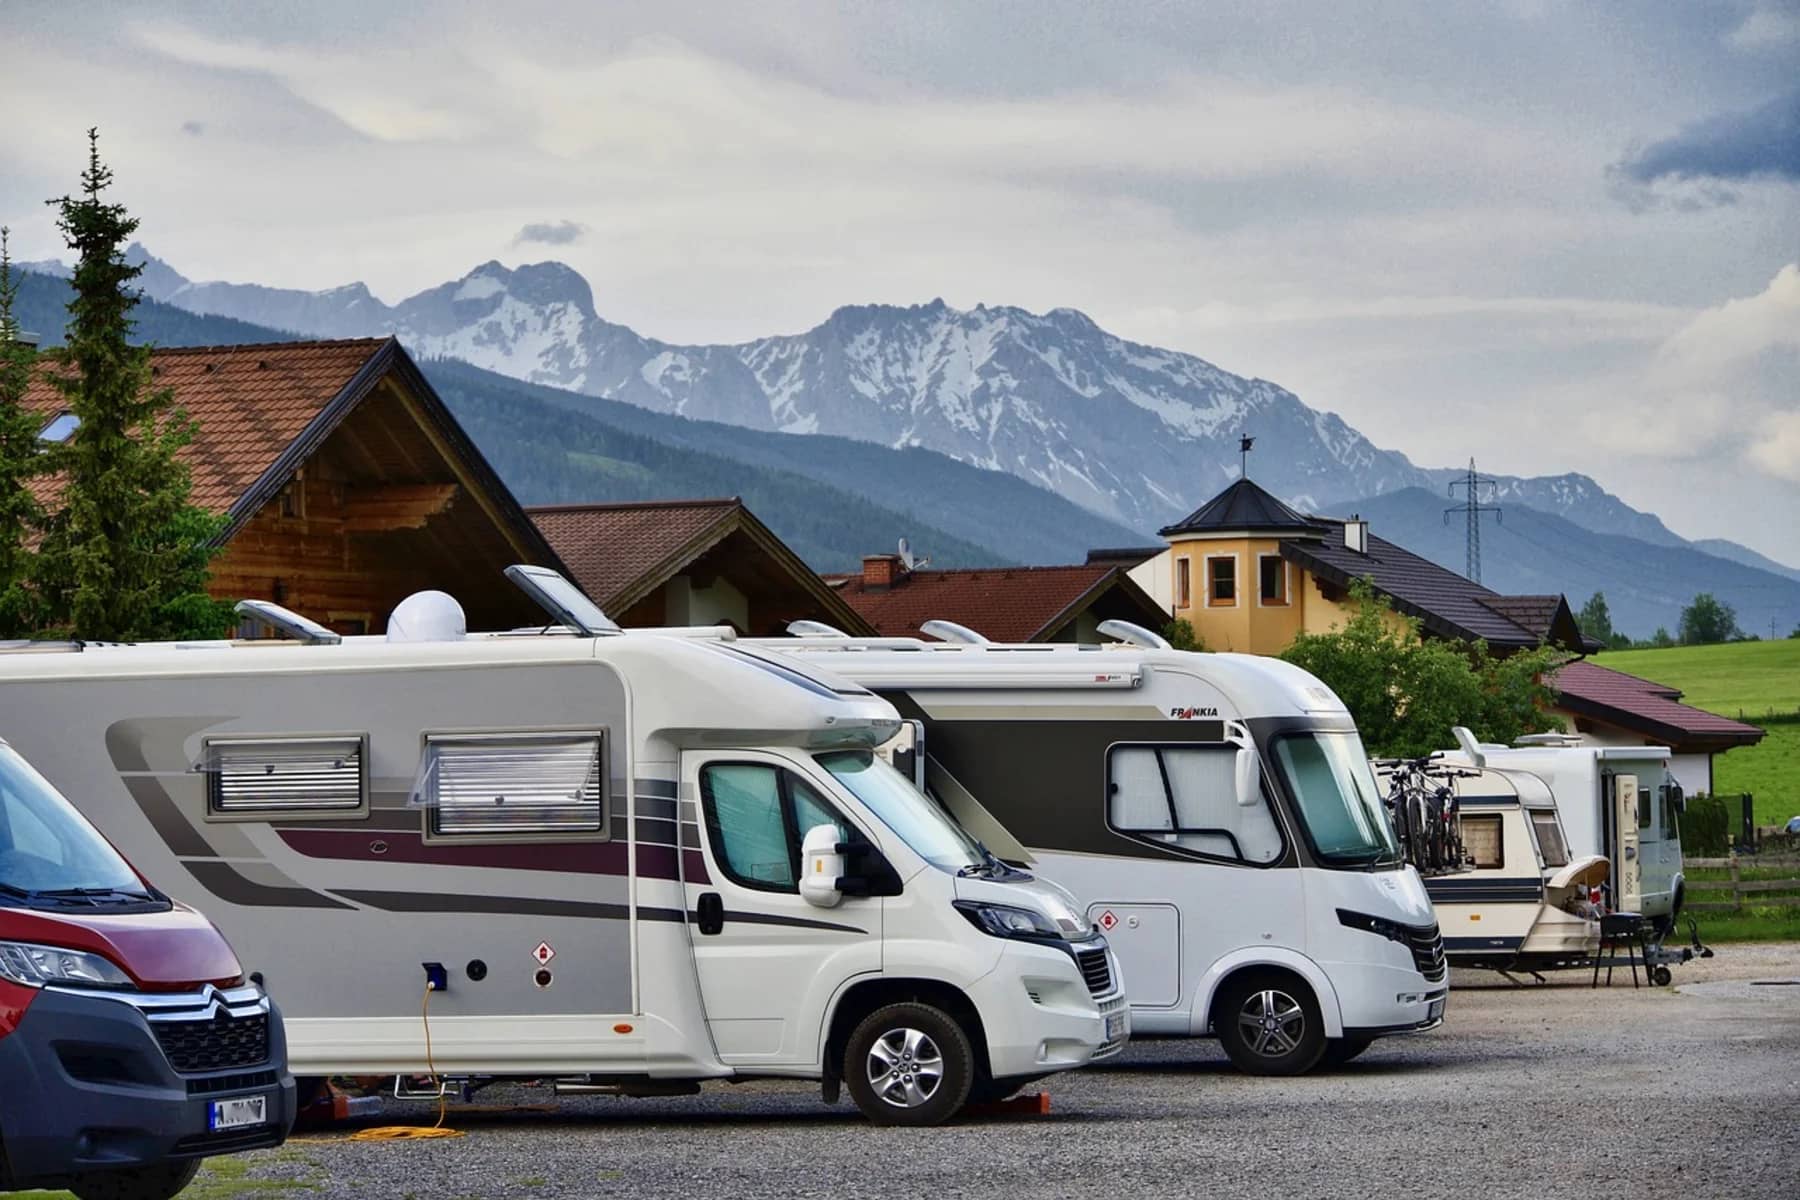 Image of RVs at a hotel to convey the difference between choosing an RV or a hotel